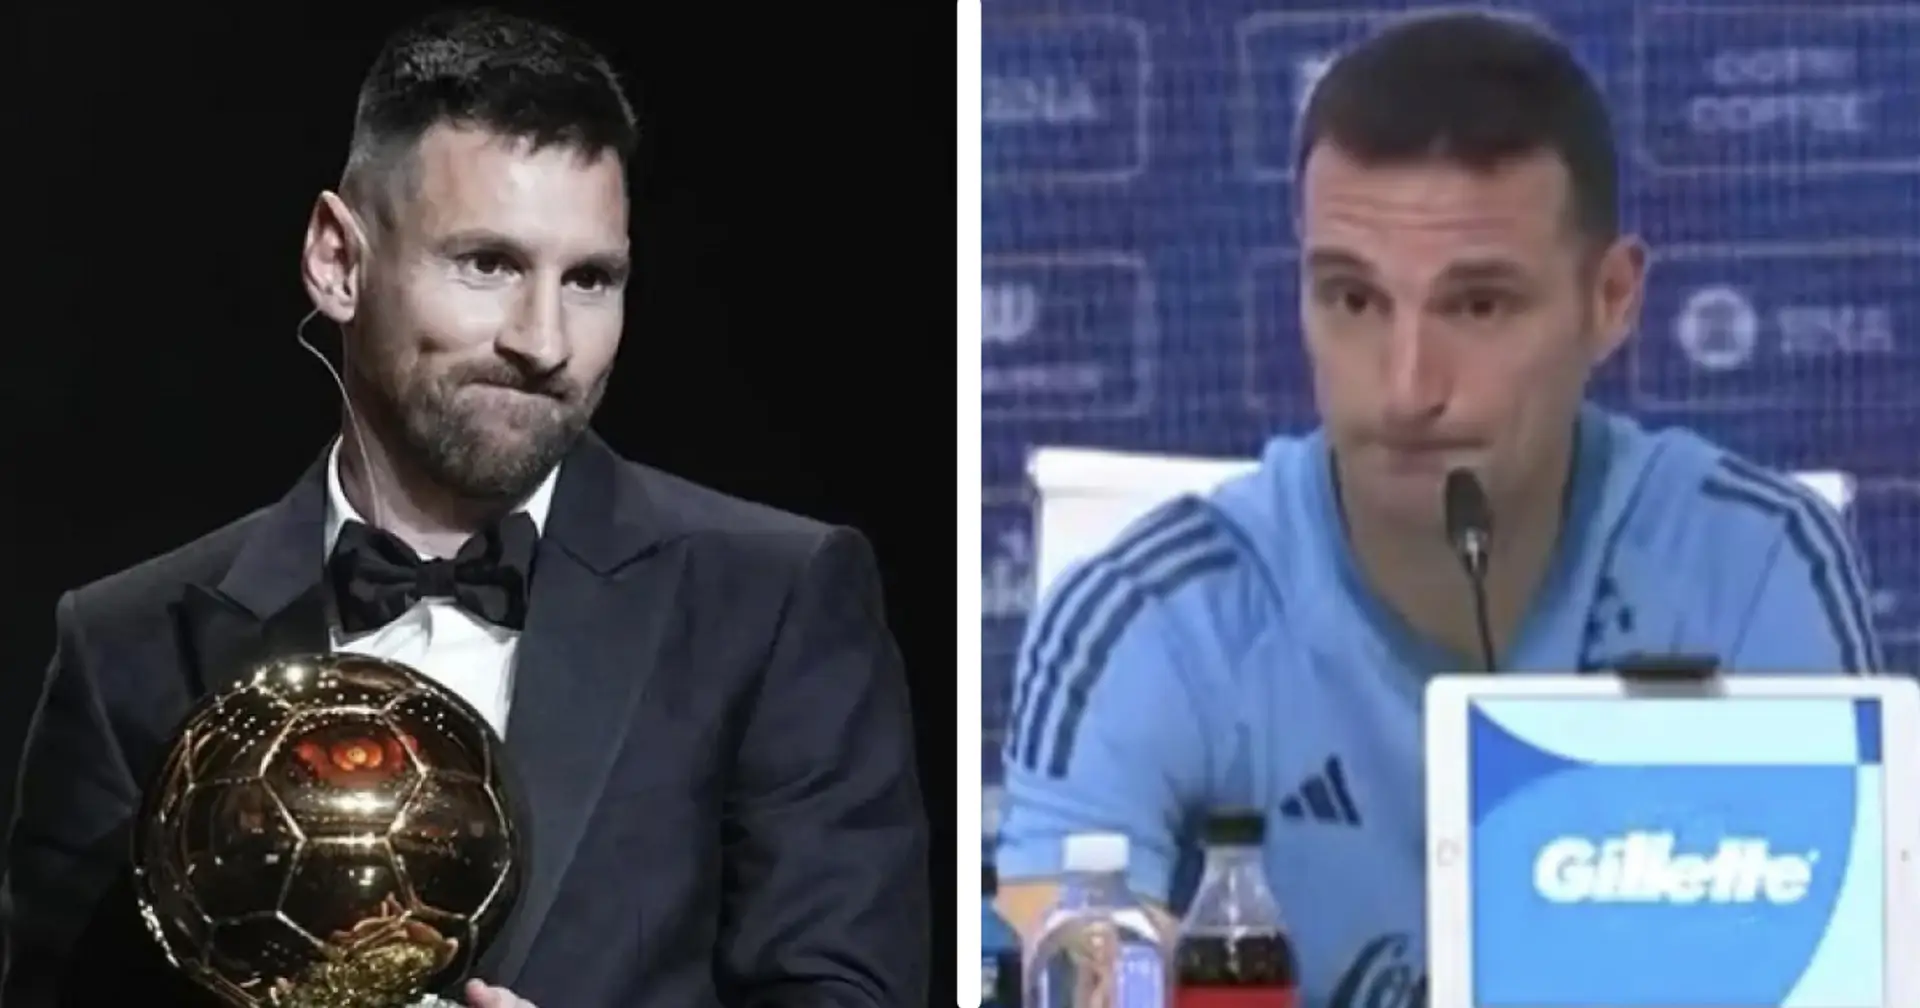 Scaloni brilliantly reacts to people doubting Messi's Ballon d'Or win